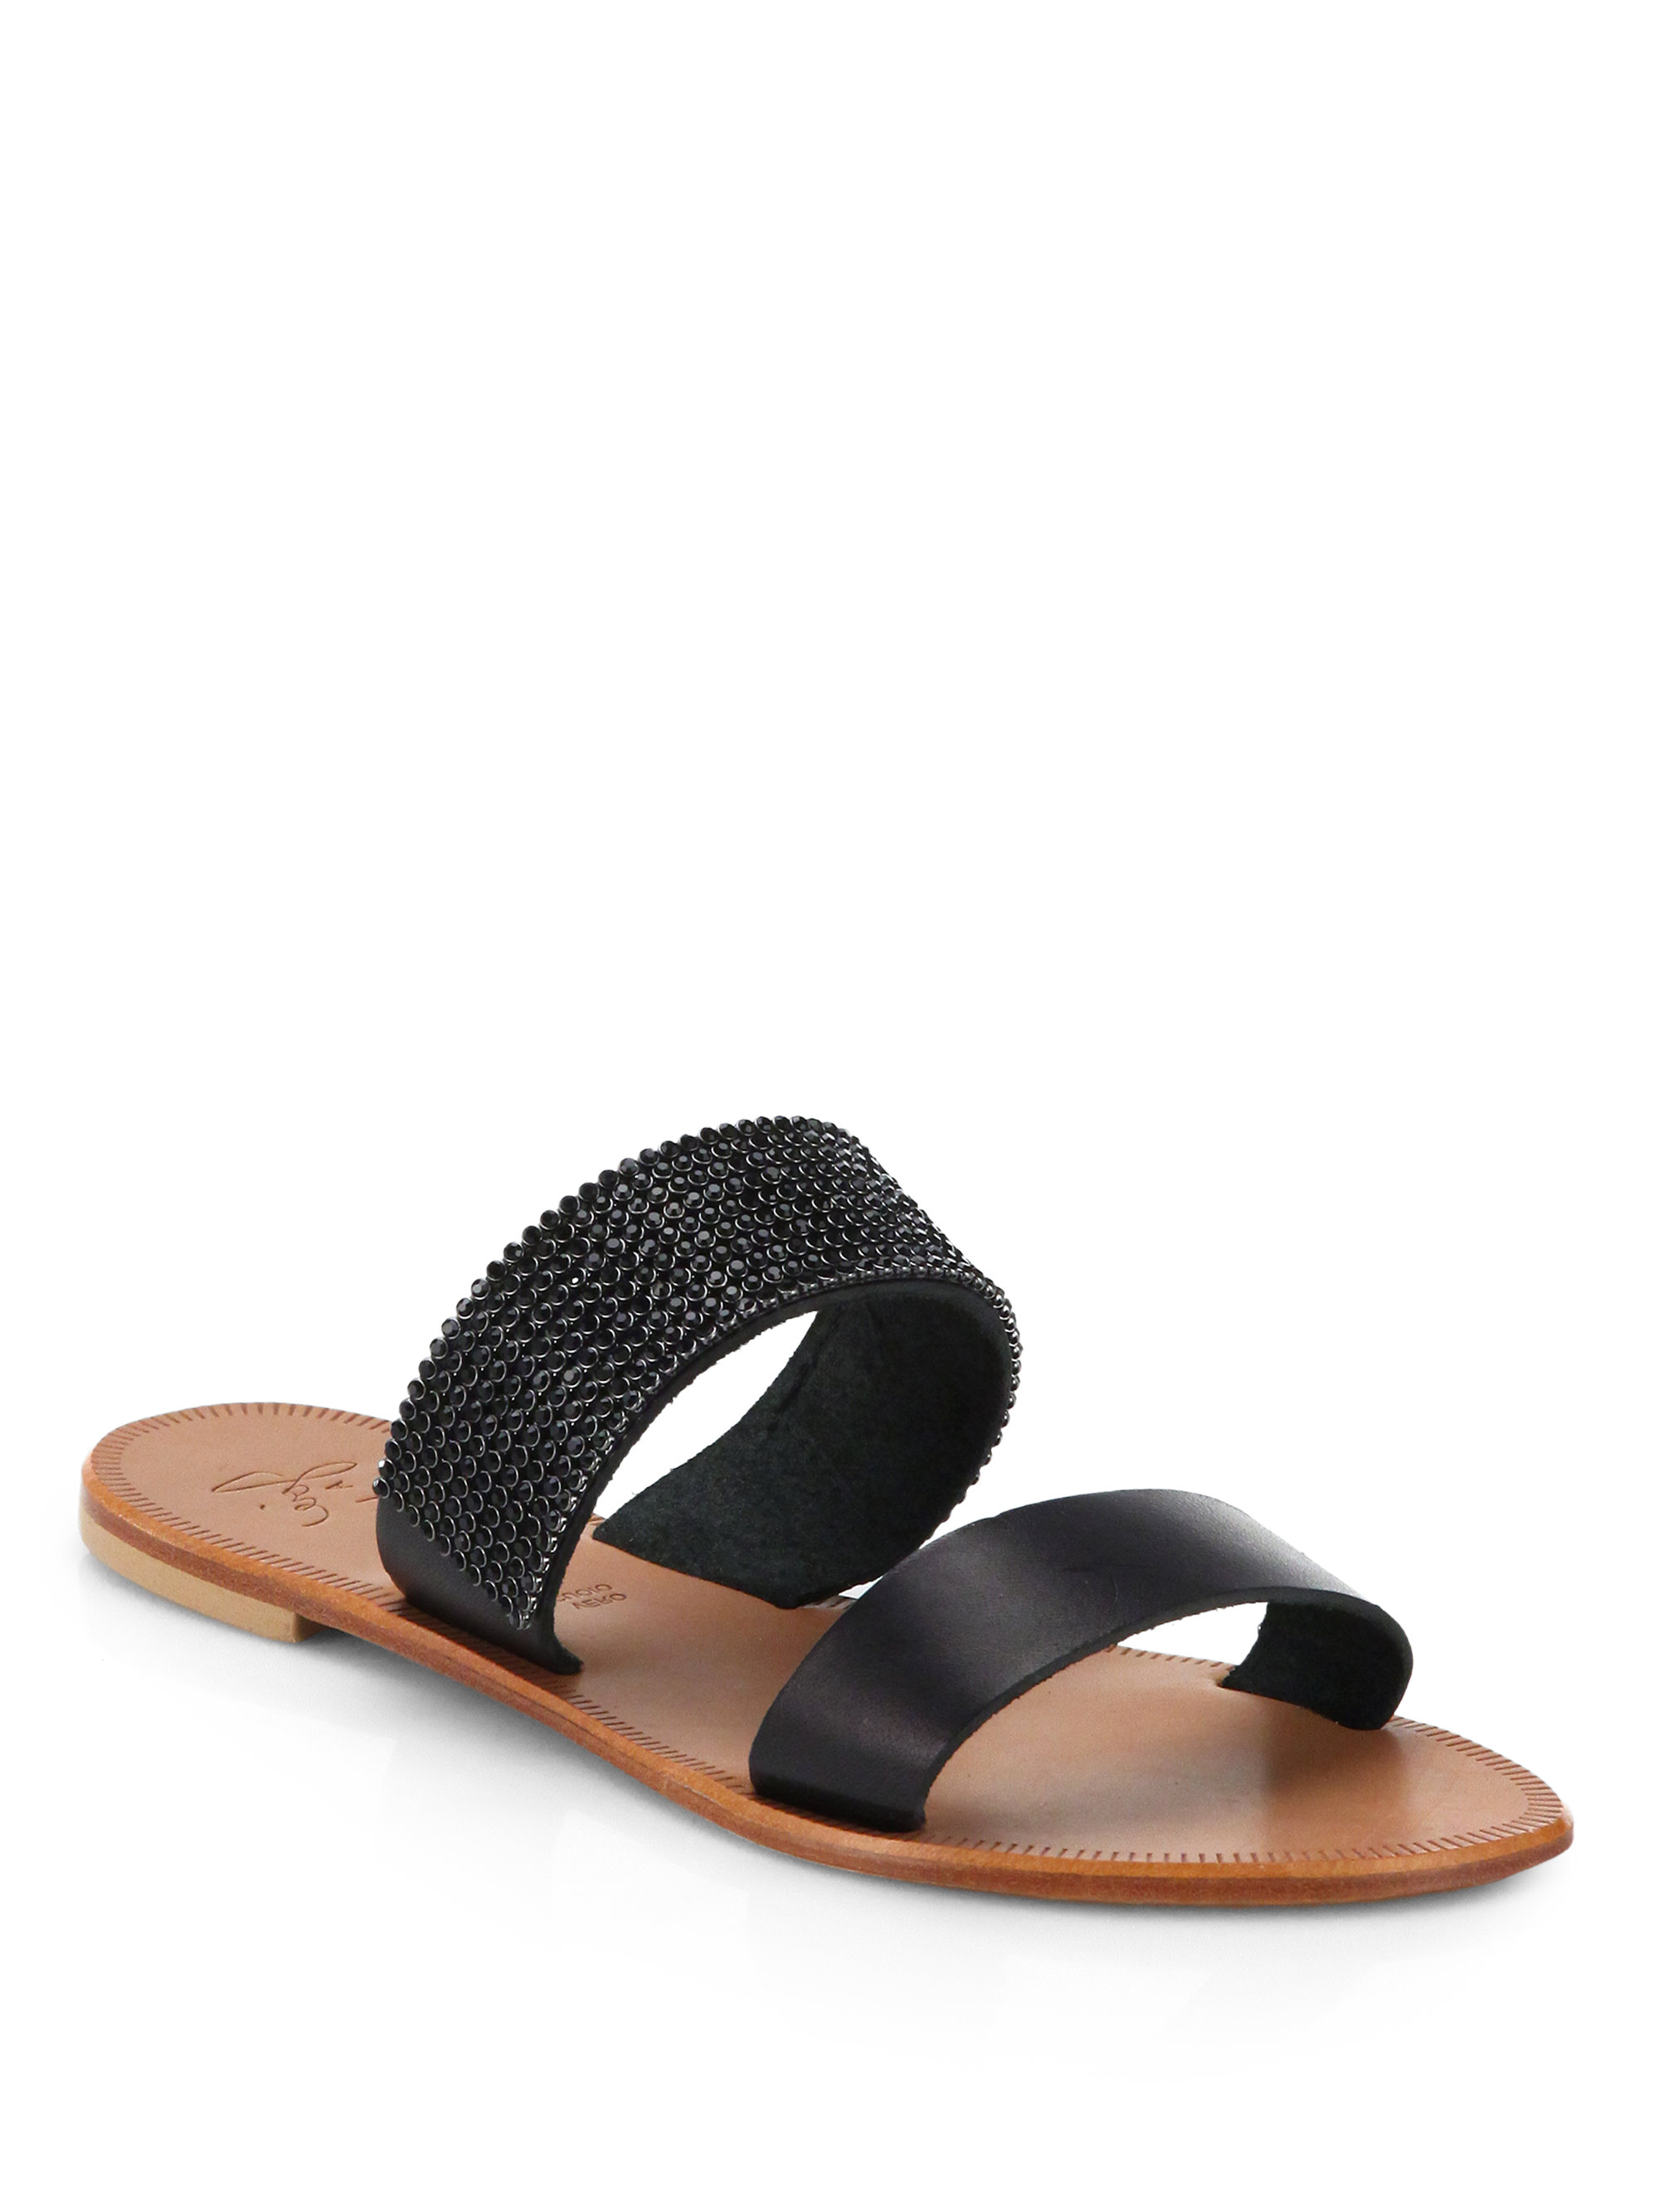 Joie Sable Jeweled Leather Sandals in Black | Lyst